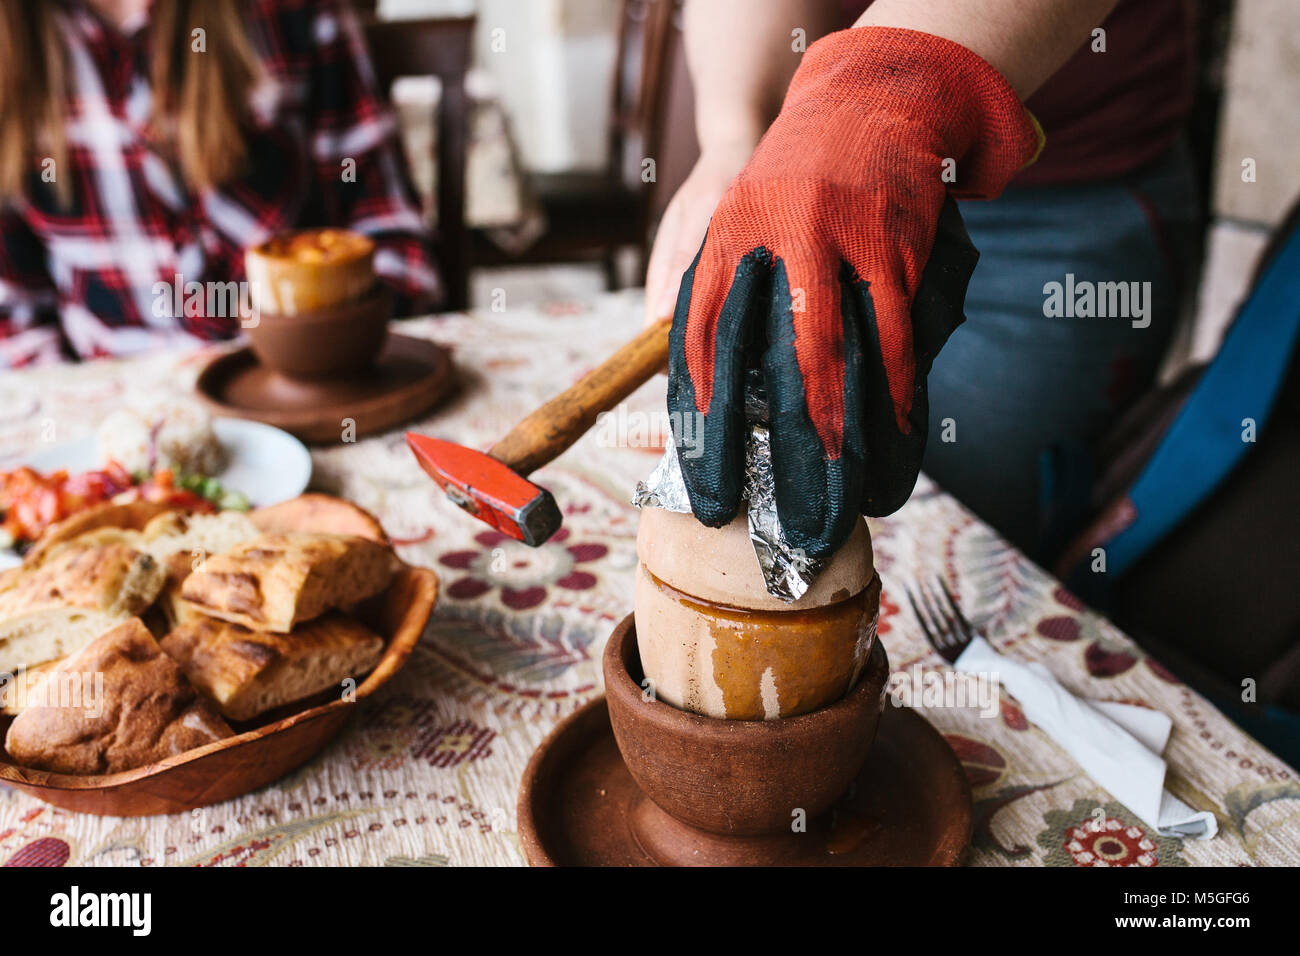 The national Turkish dish in the pot that is broken before use is called Testi-kebab. The cook breaks the pot with a hammer before serving the restaurant visitor. Stock Photo